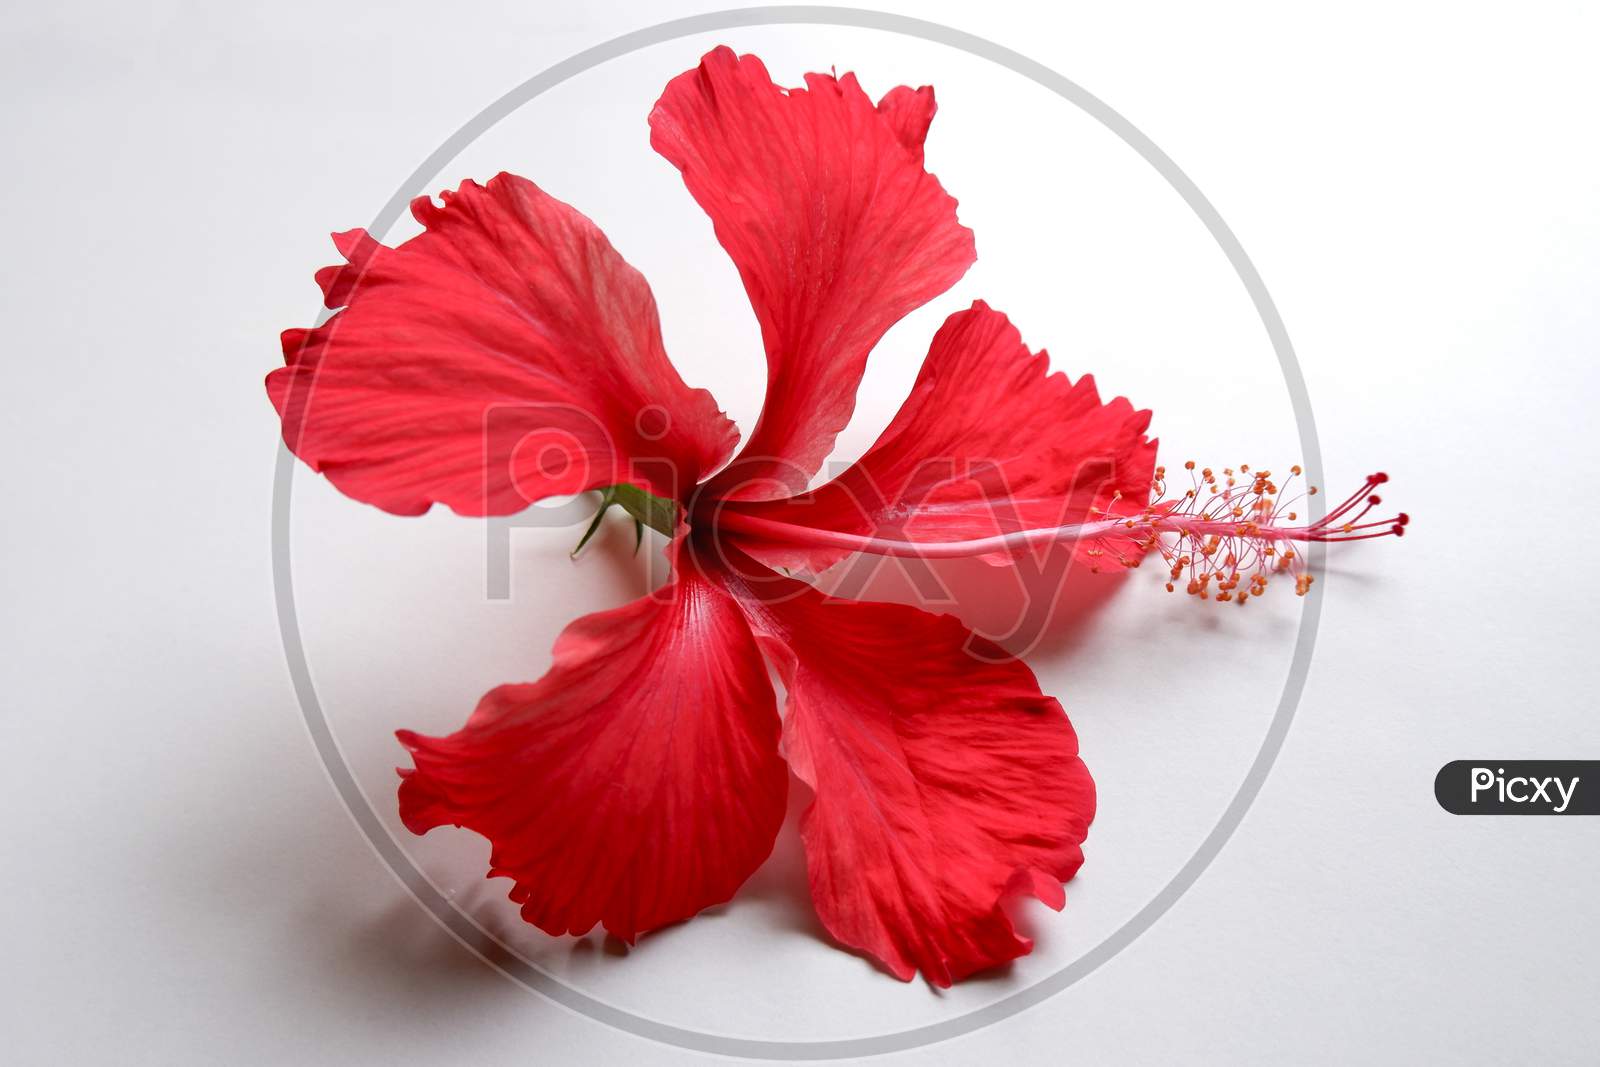 Red Hibiscus Flower On White Background